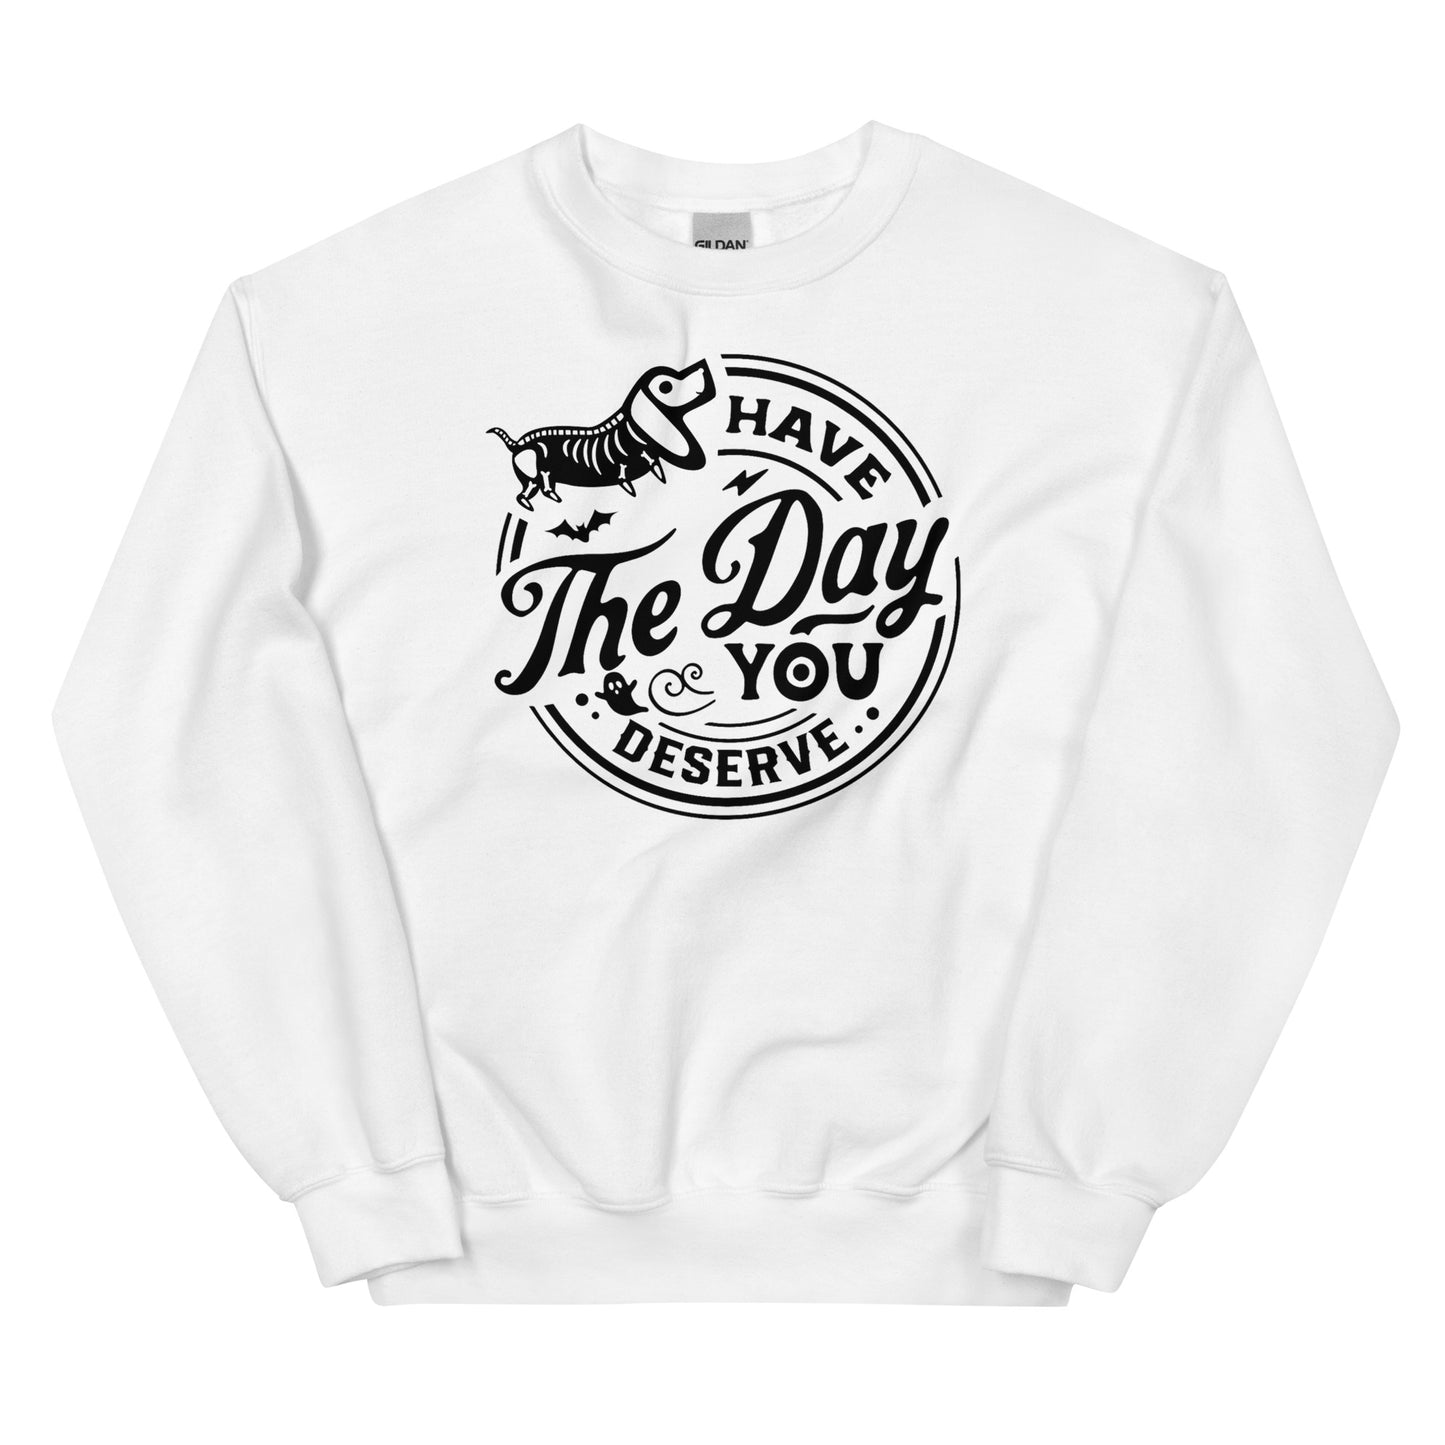 Unisex Sweatshirt - have the day you deserve (white)